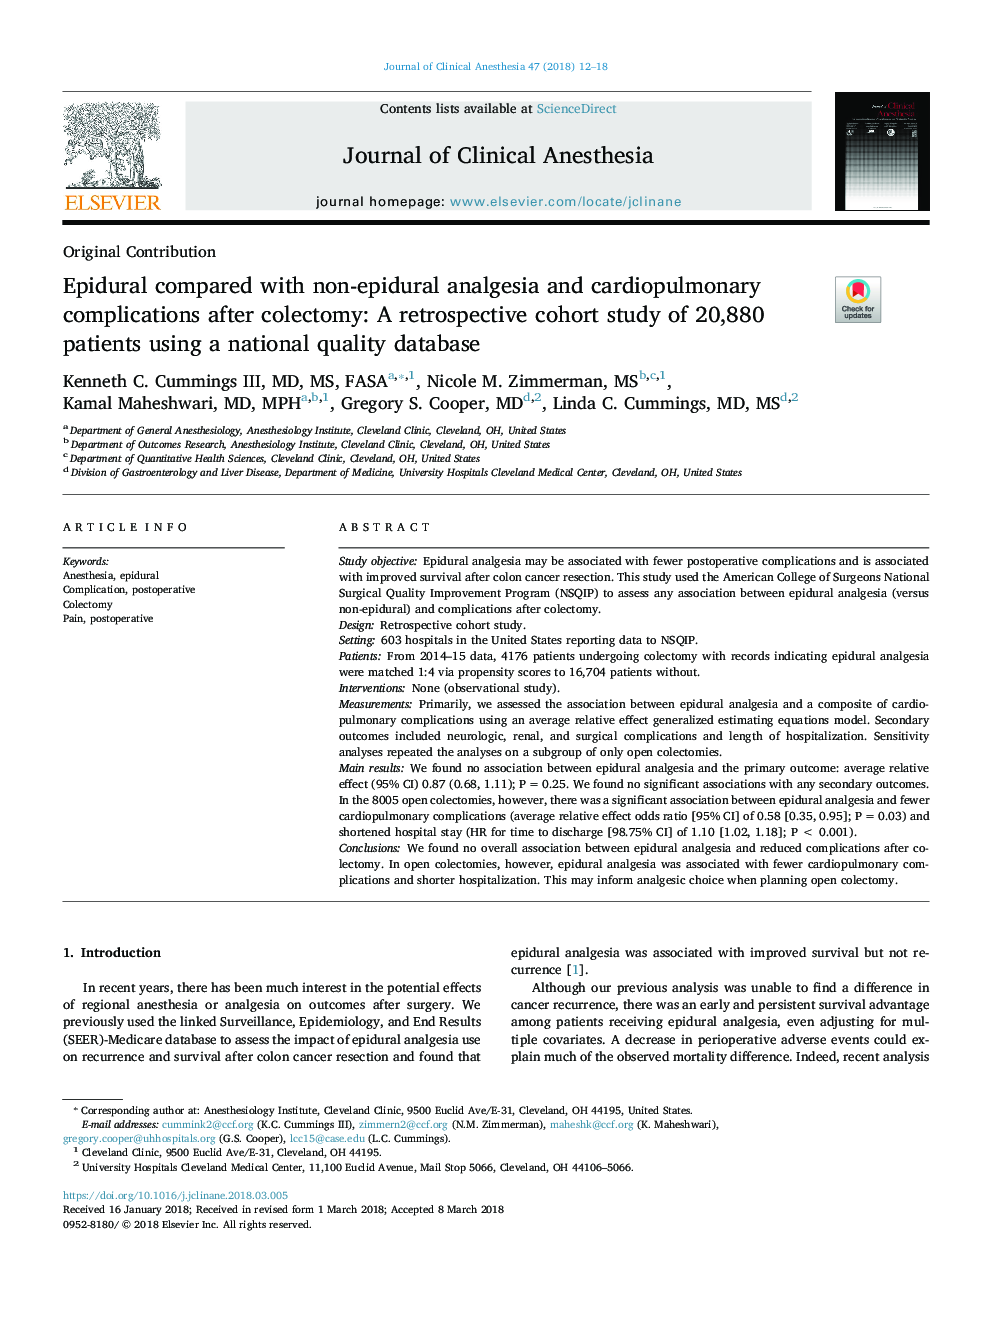 Epidural compared with non-epidural analgesia and cardiopulmonary complications after colectomy: A retrospective cohort study of 20,880 patients using a national quality database